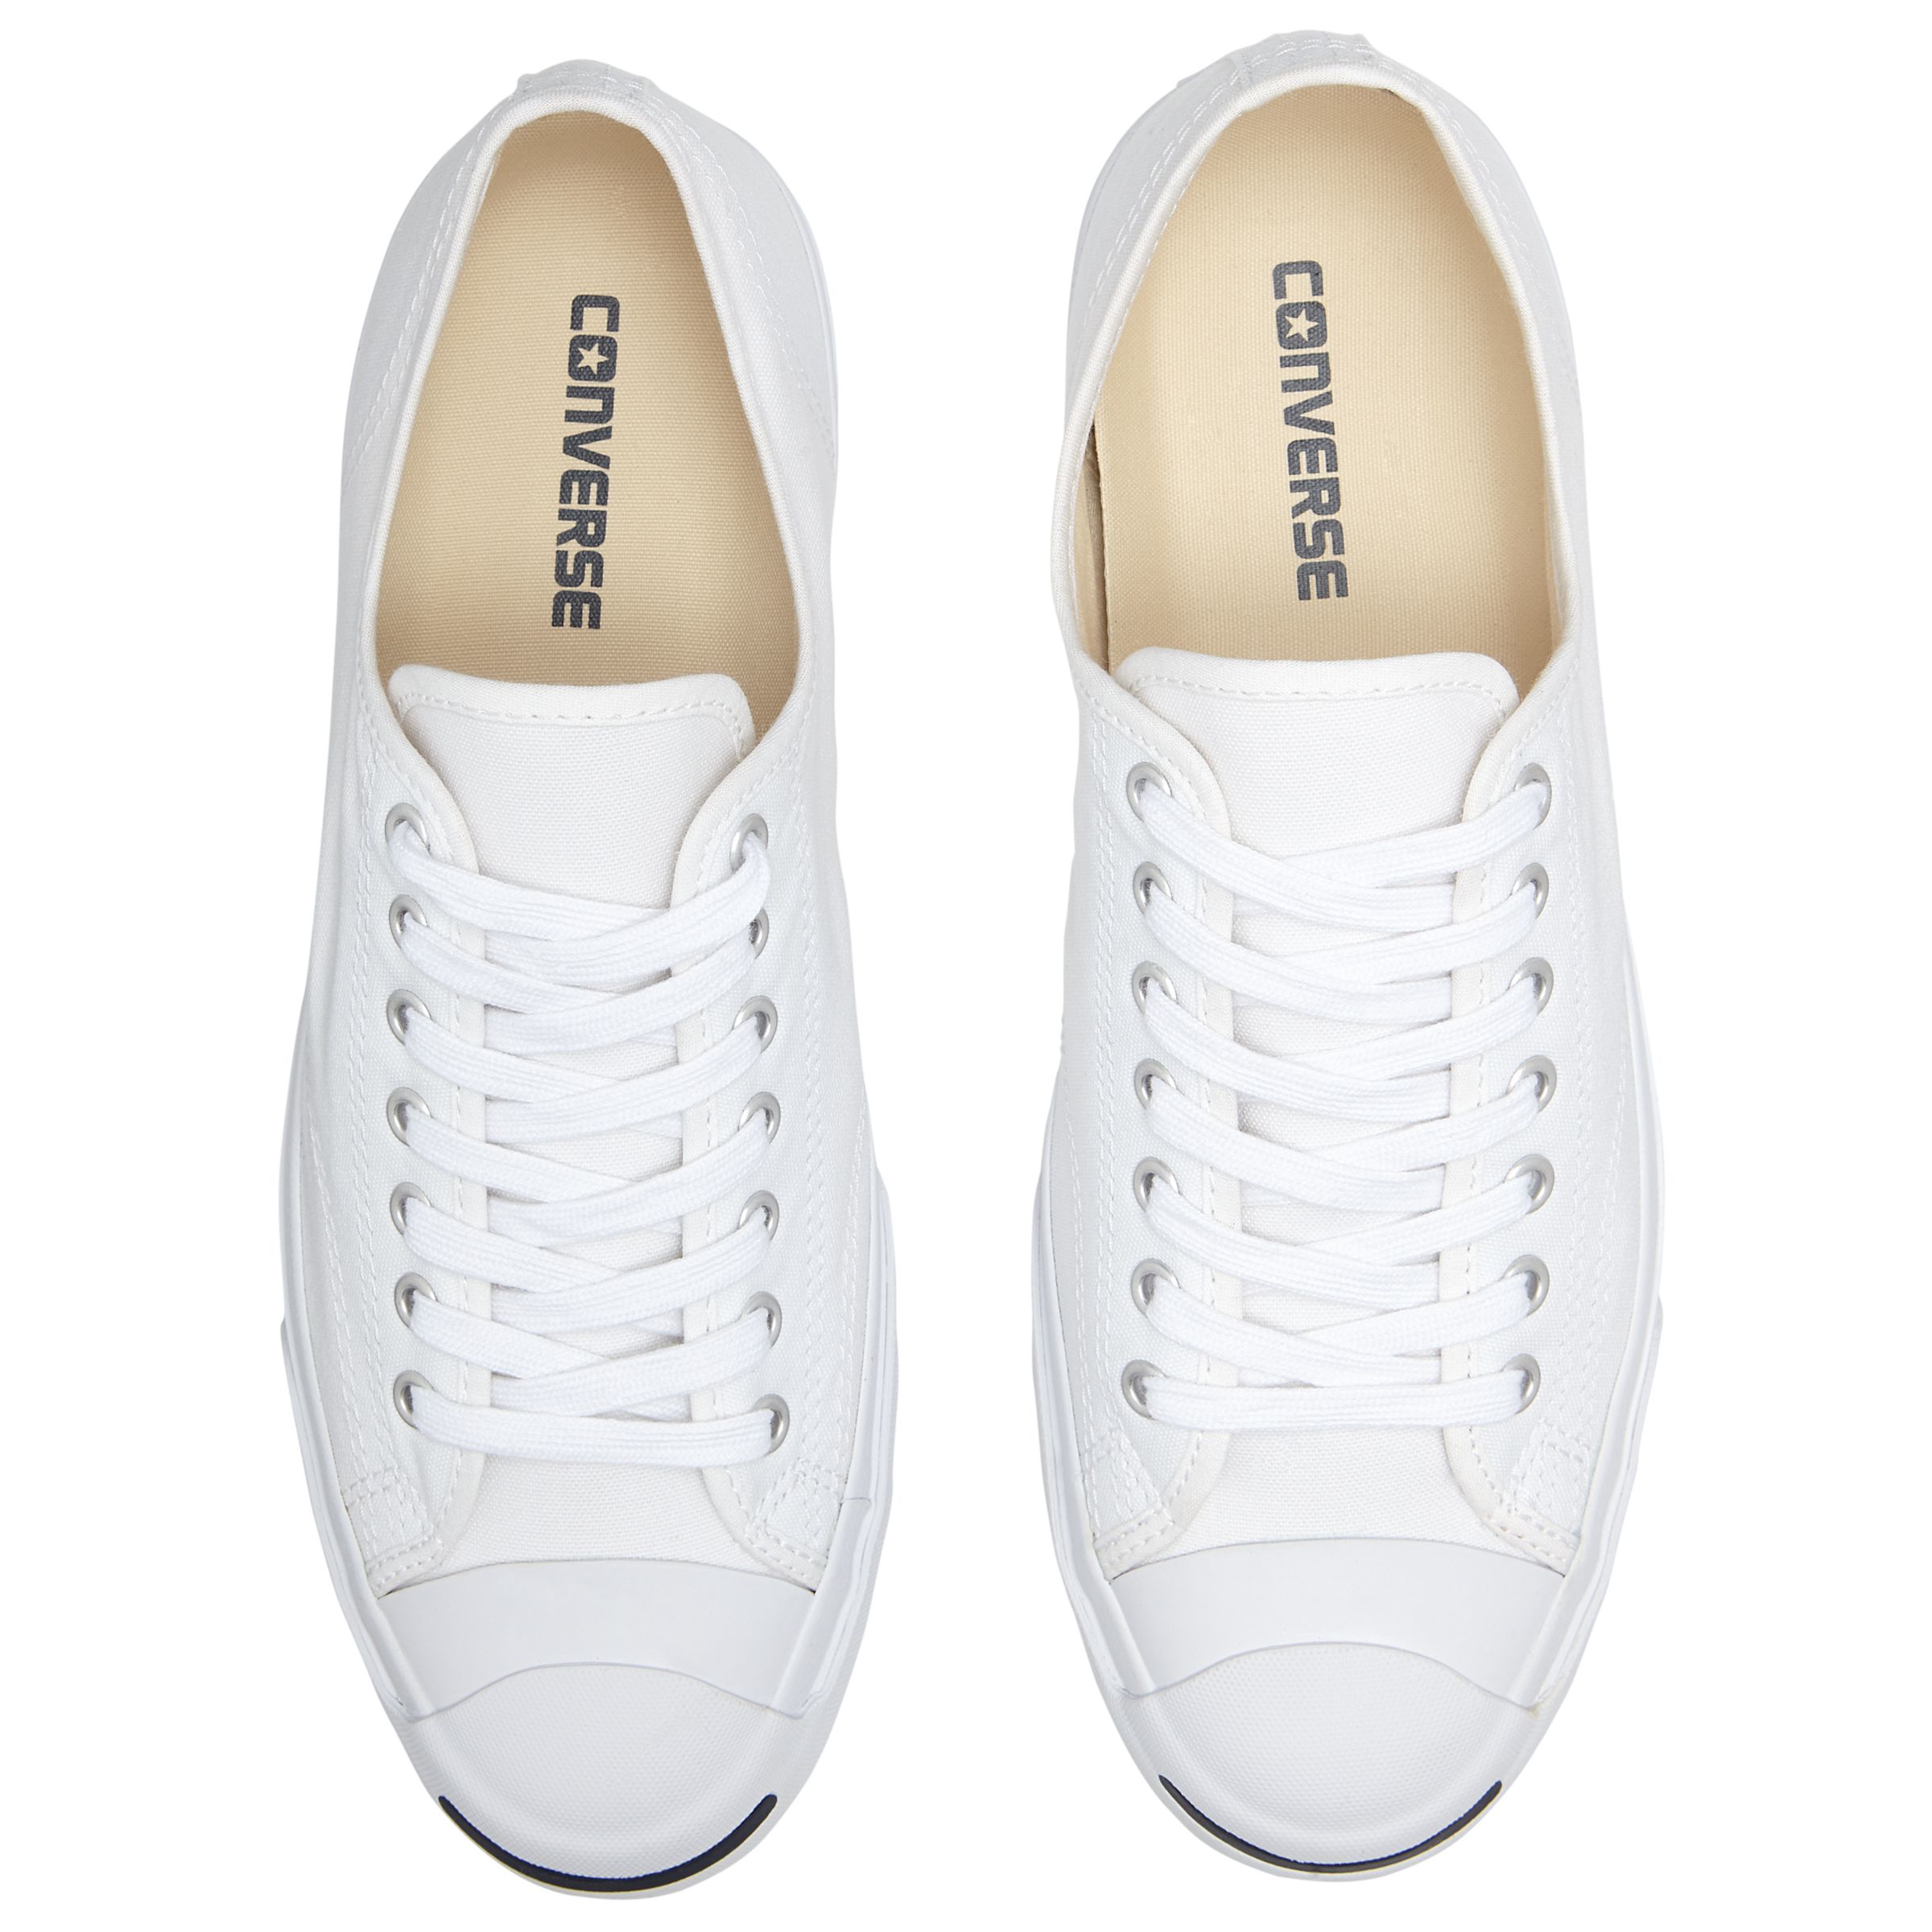 jack purcell no laces